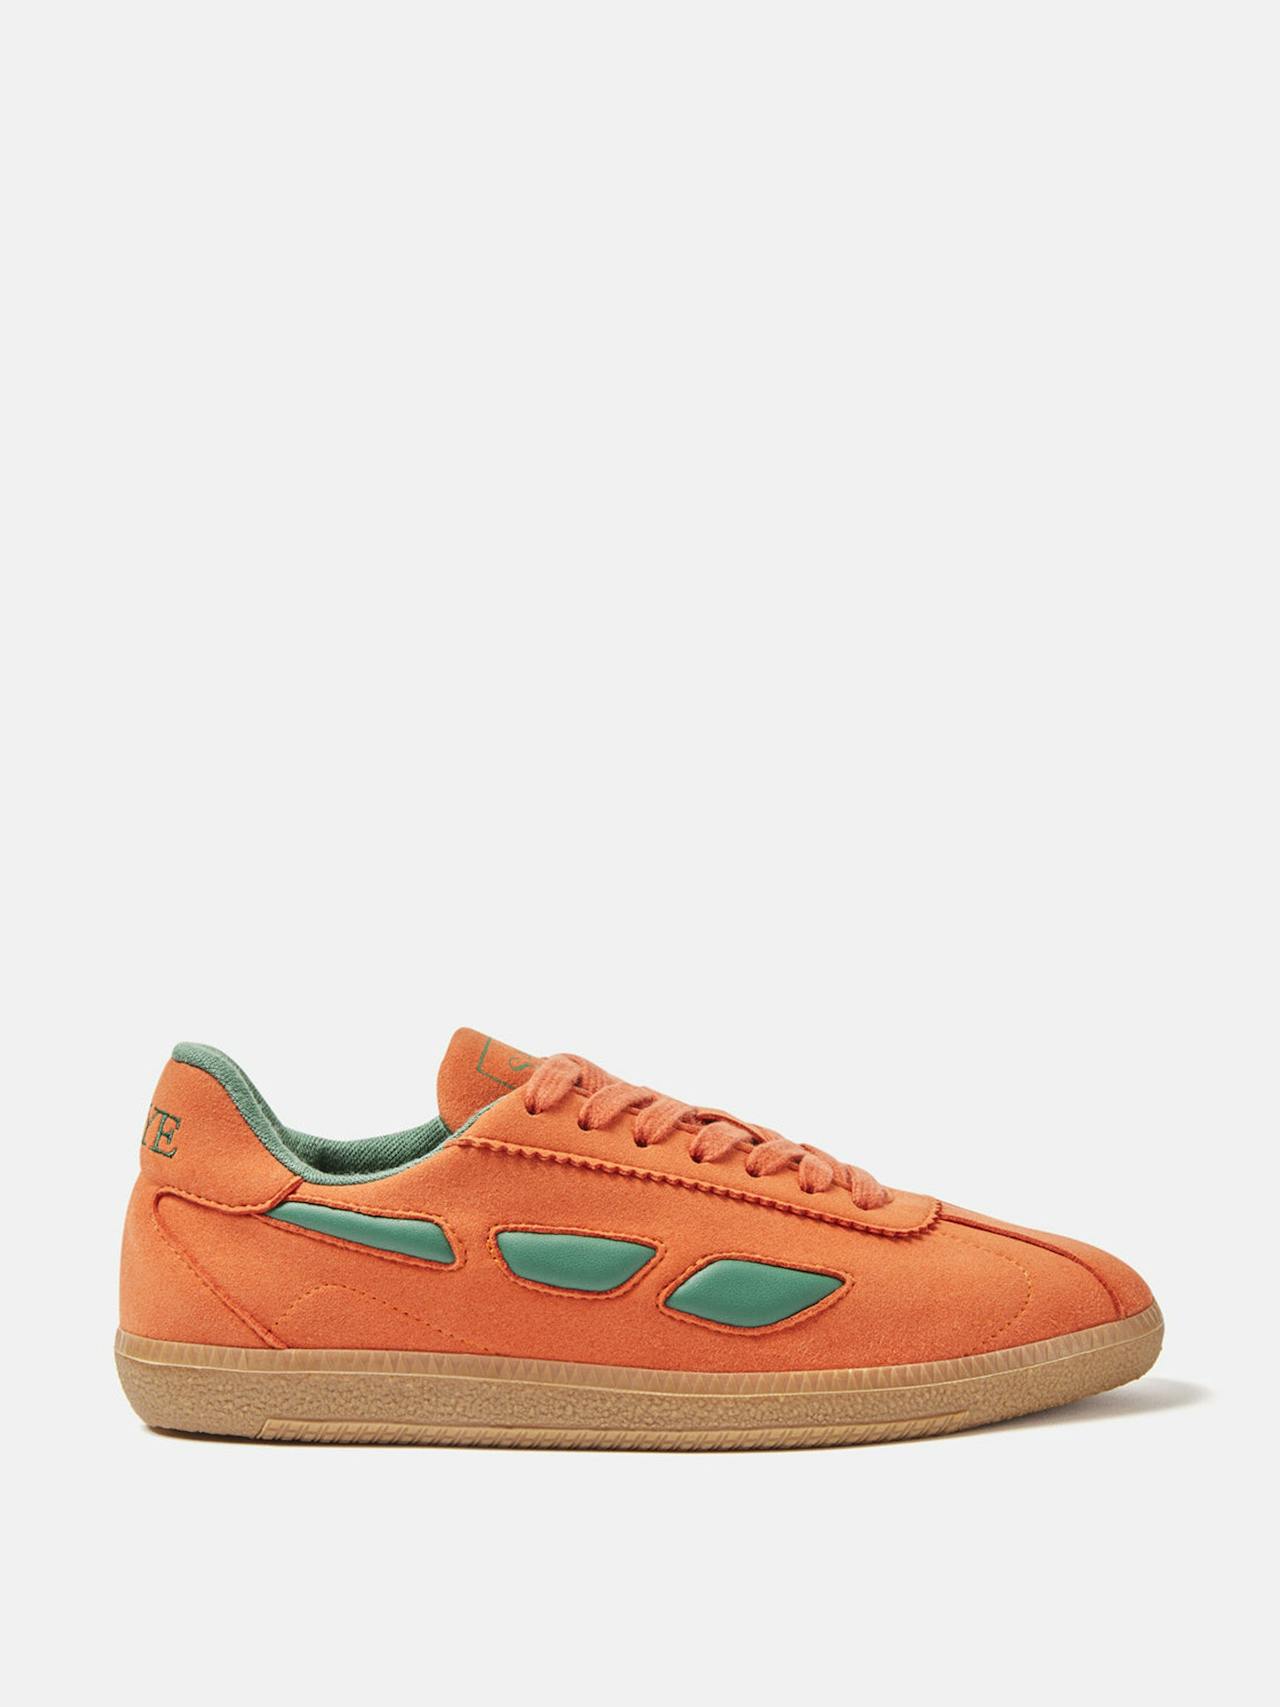 Modelo '70 trainer in orange and green